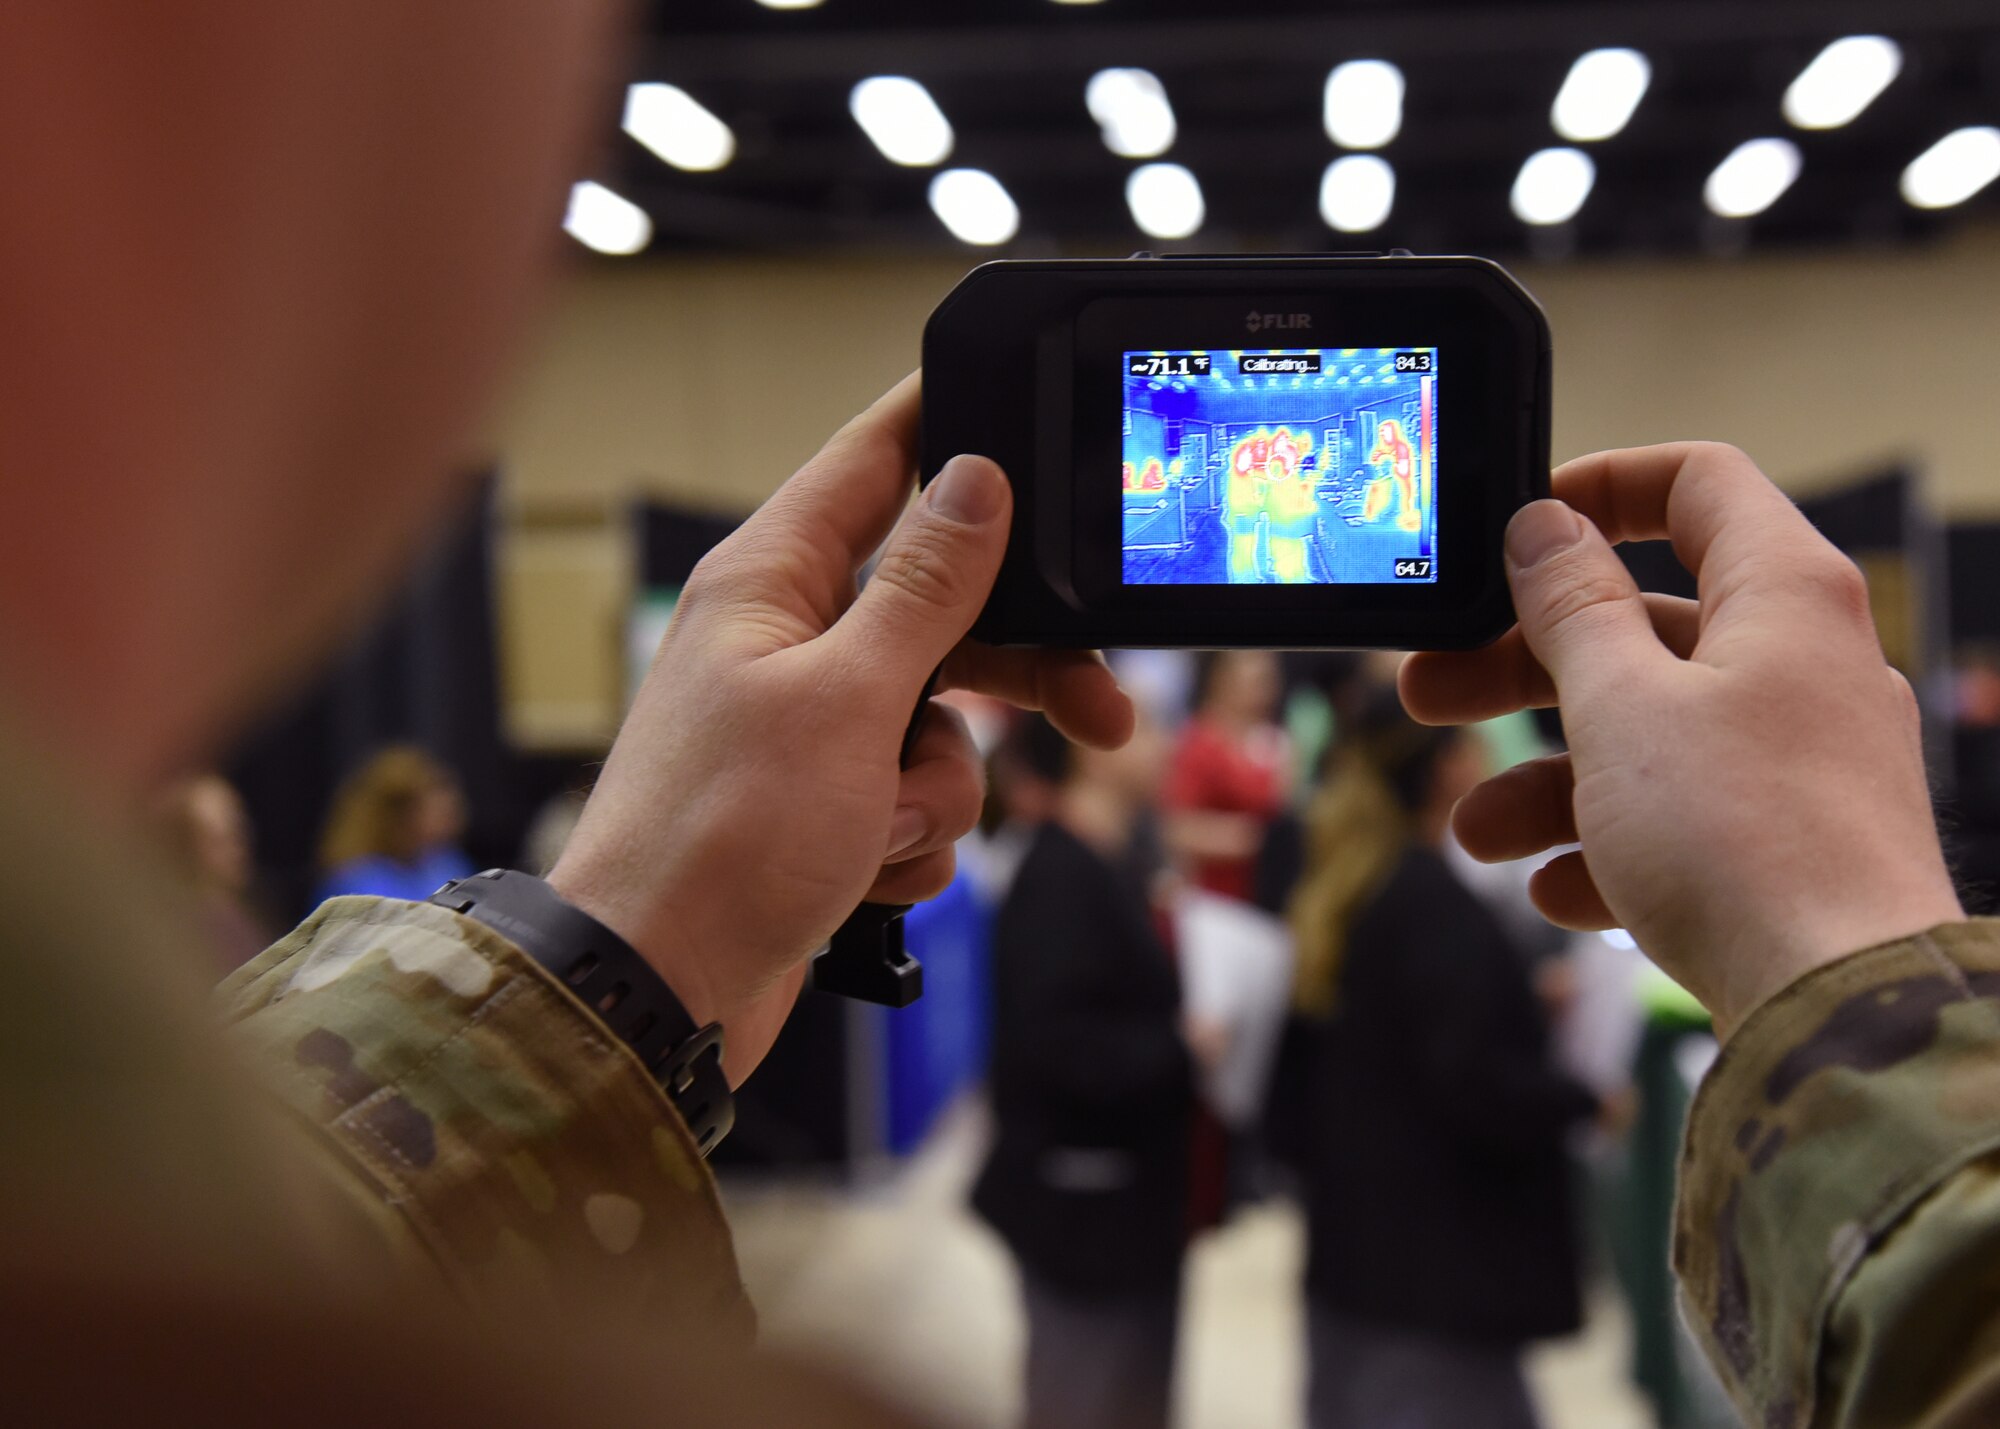 U.S Air Force Staff Sgt. Benjamin Myers, 315th Training Squadron instructor displays the functionality of a forward looking infrared camera while setting up a booth while attending Careers Y’all, a youth career fair, at the McNease Convention Center, in San Angelo, Texas, March 6, 2019. The cameras produce imagery based on thermal activity and can be attached to remotely piloted aircrafts for aerial assessments. (U.S. Air Force photo by Airman 1st Class Abbey Rieves/Released)